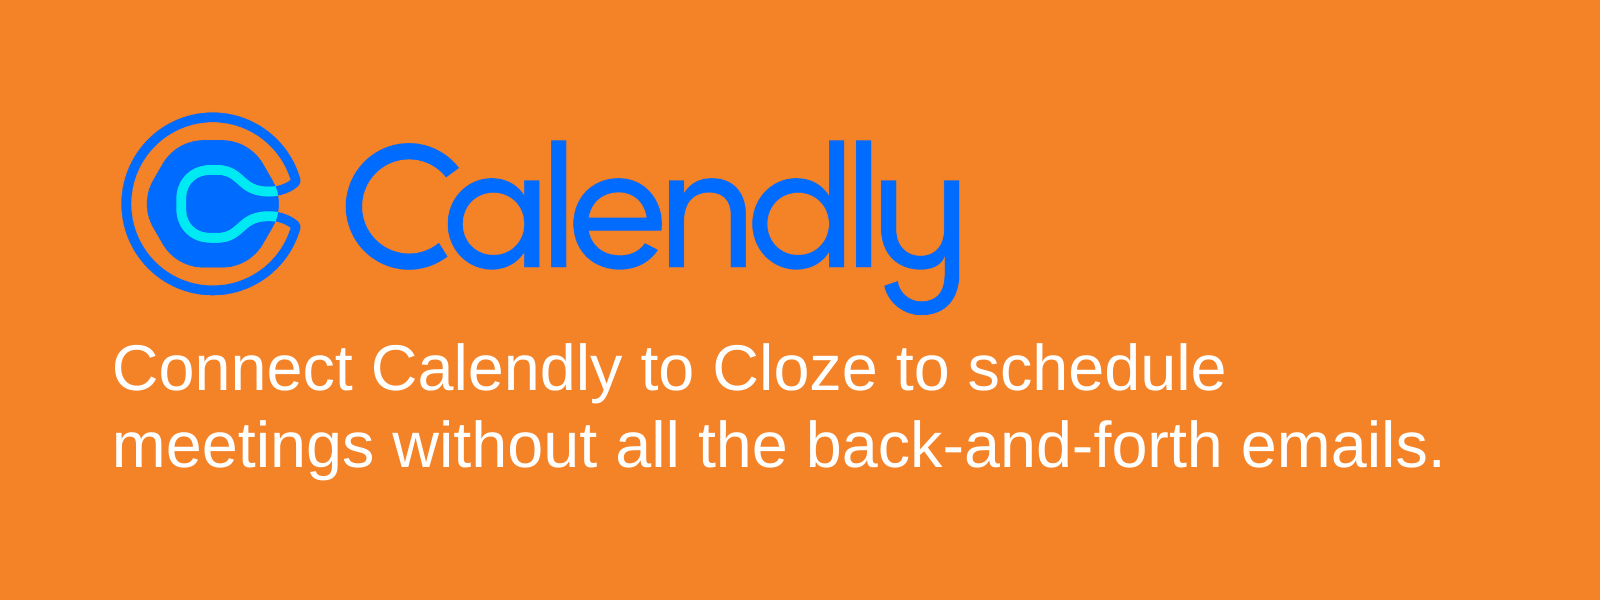 Connect Calendly to Cloze to schedule meetings without all the back-and-forth emails.